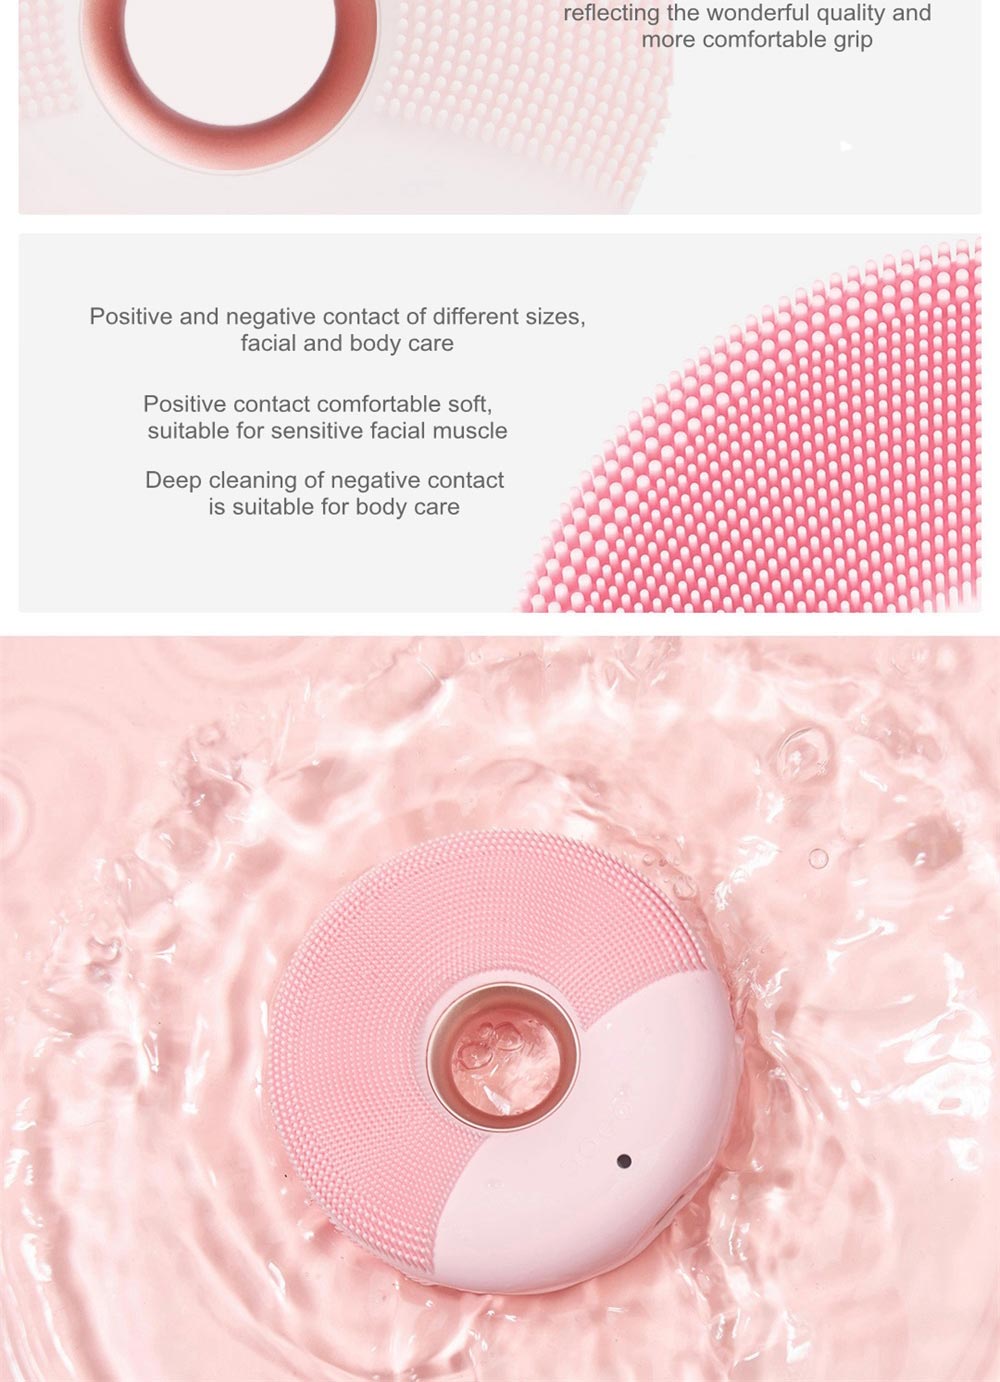 2019 xiaomi doco sonic cleansing instrument price